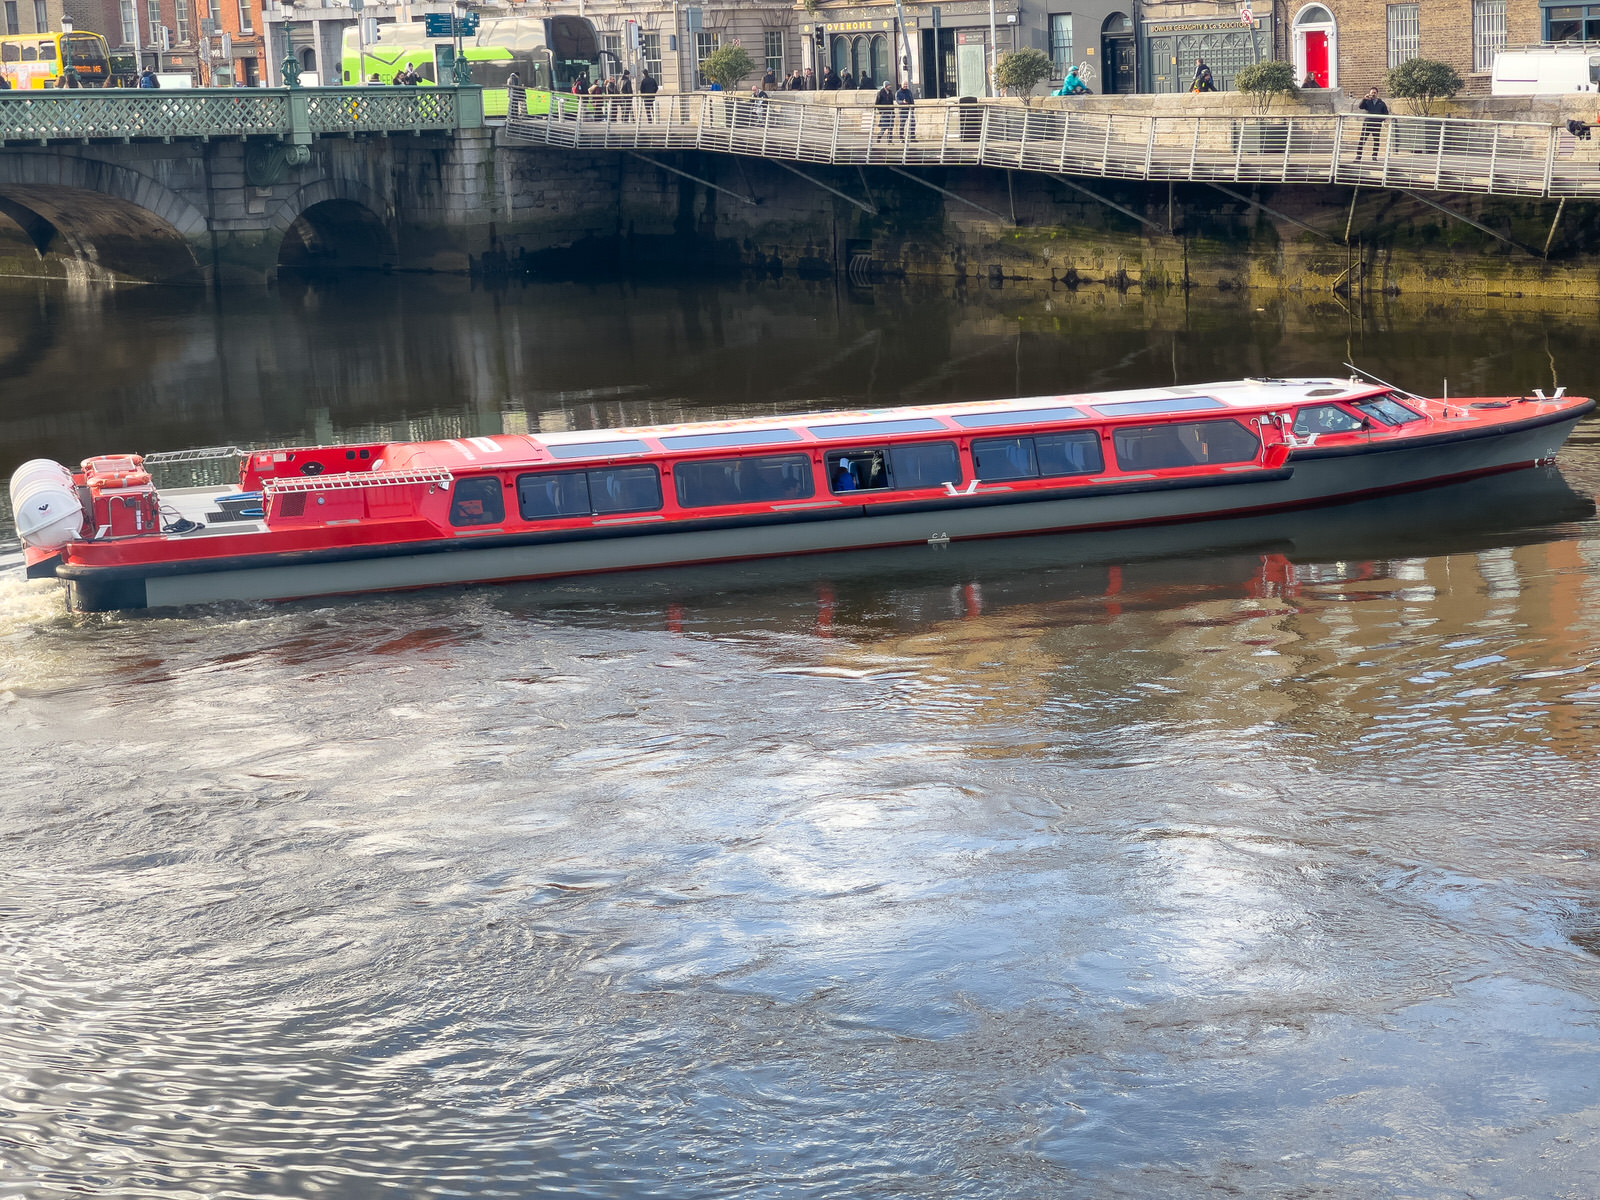 I HAD NOTHING BETTER TO DO [SO I PHOTOGRAPHED THE SPIRIT OF THE DOCKLANDS TURNING ON THE RIVER LIFFEY]-229459-1